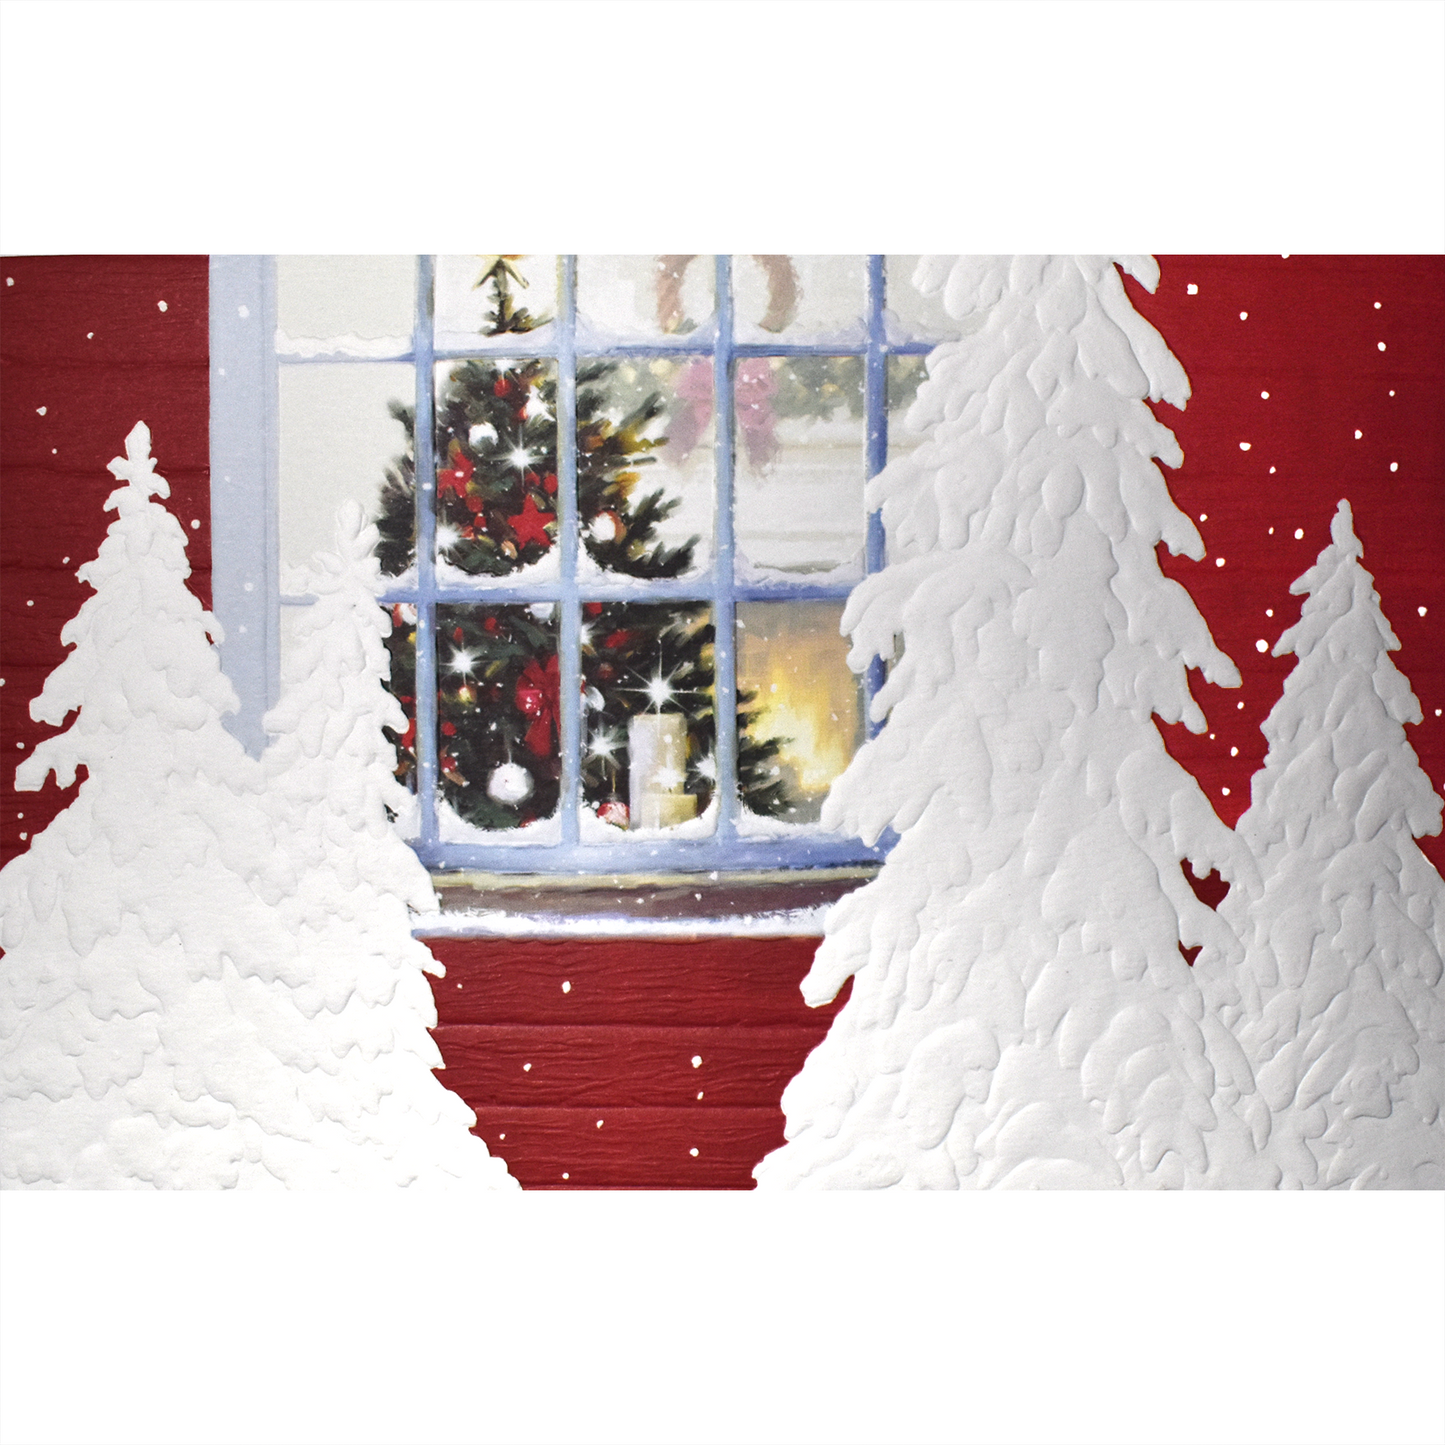 Warmth Of Home Christmas Cards - Box of 16